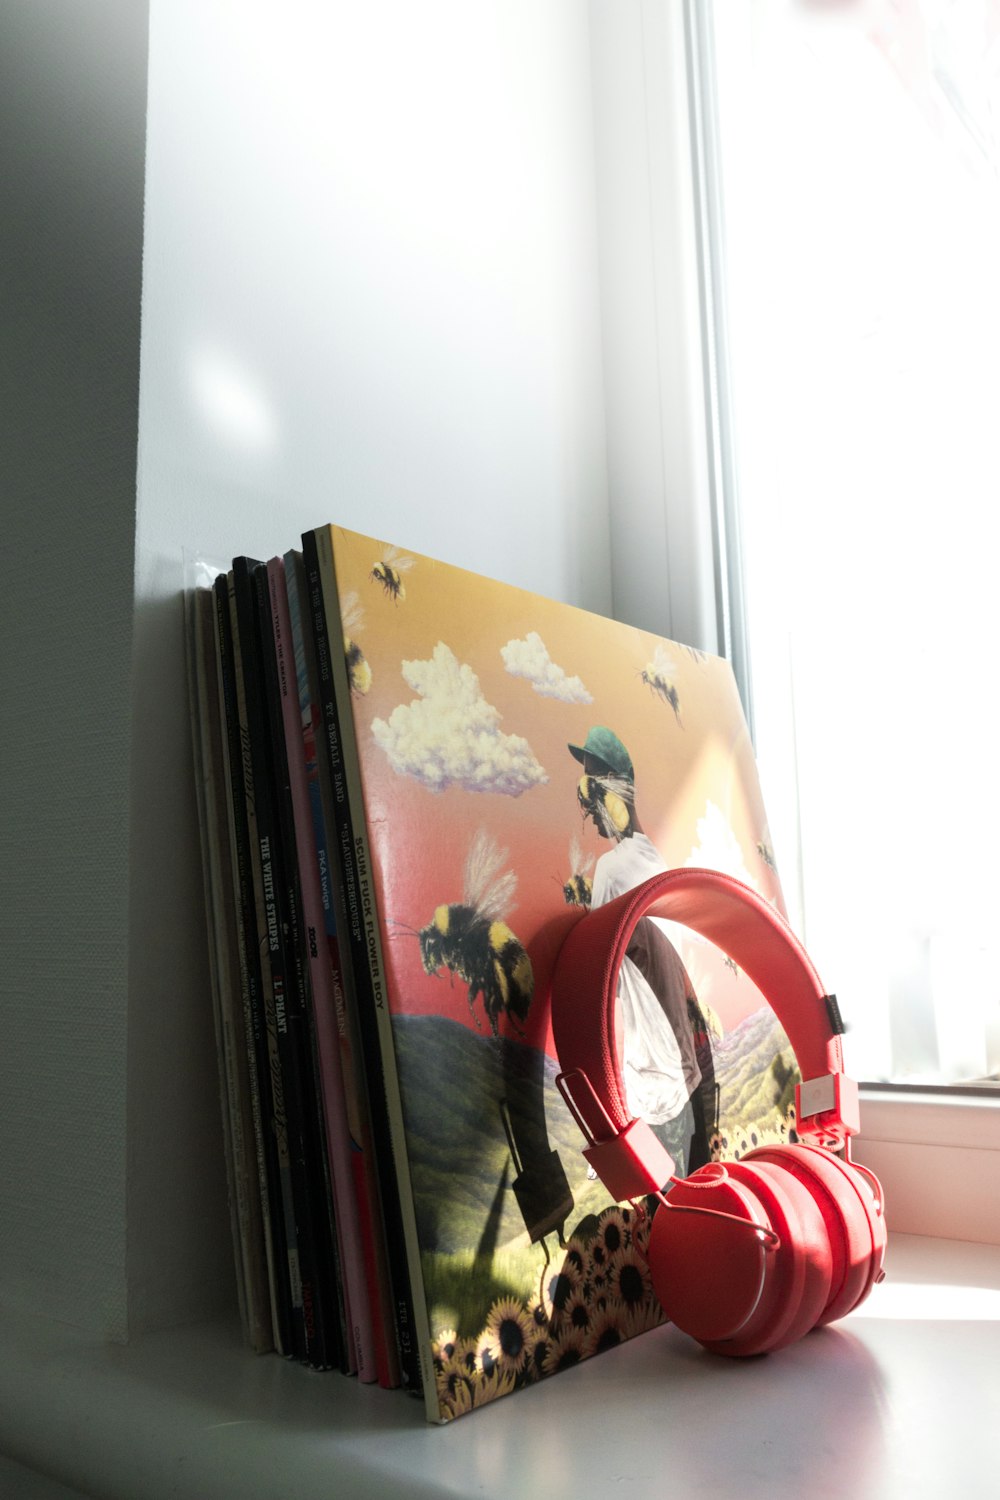 red and white headphones on books